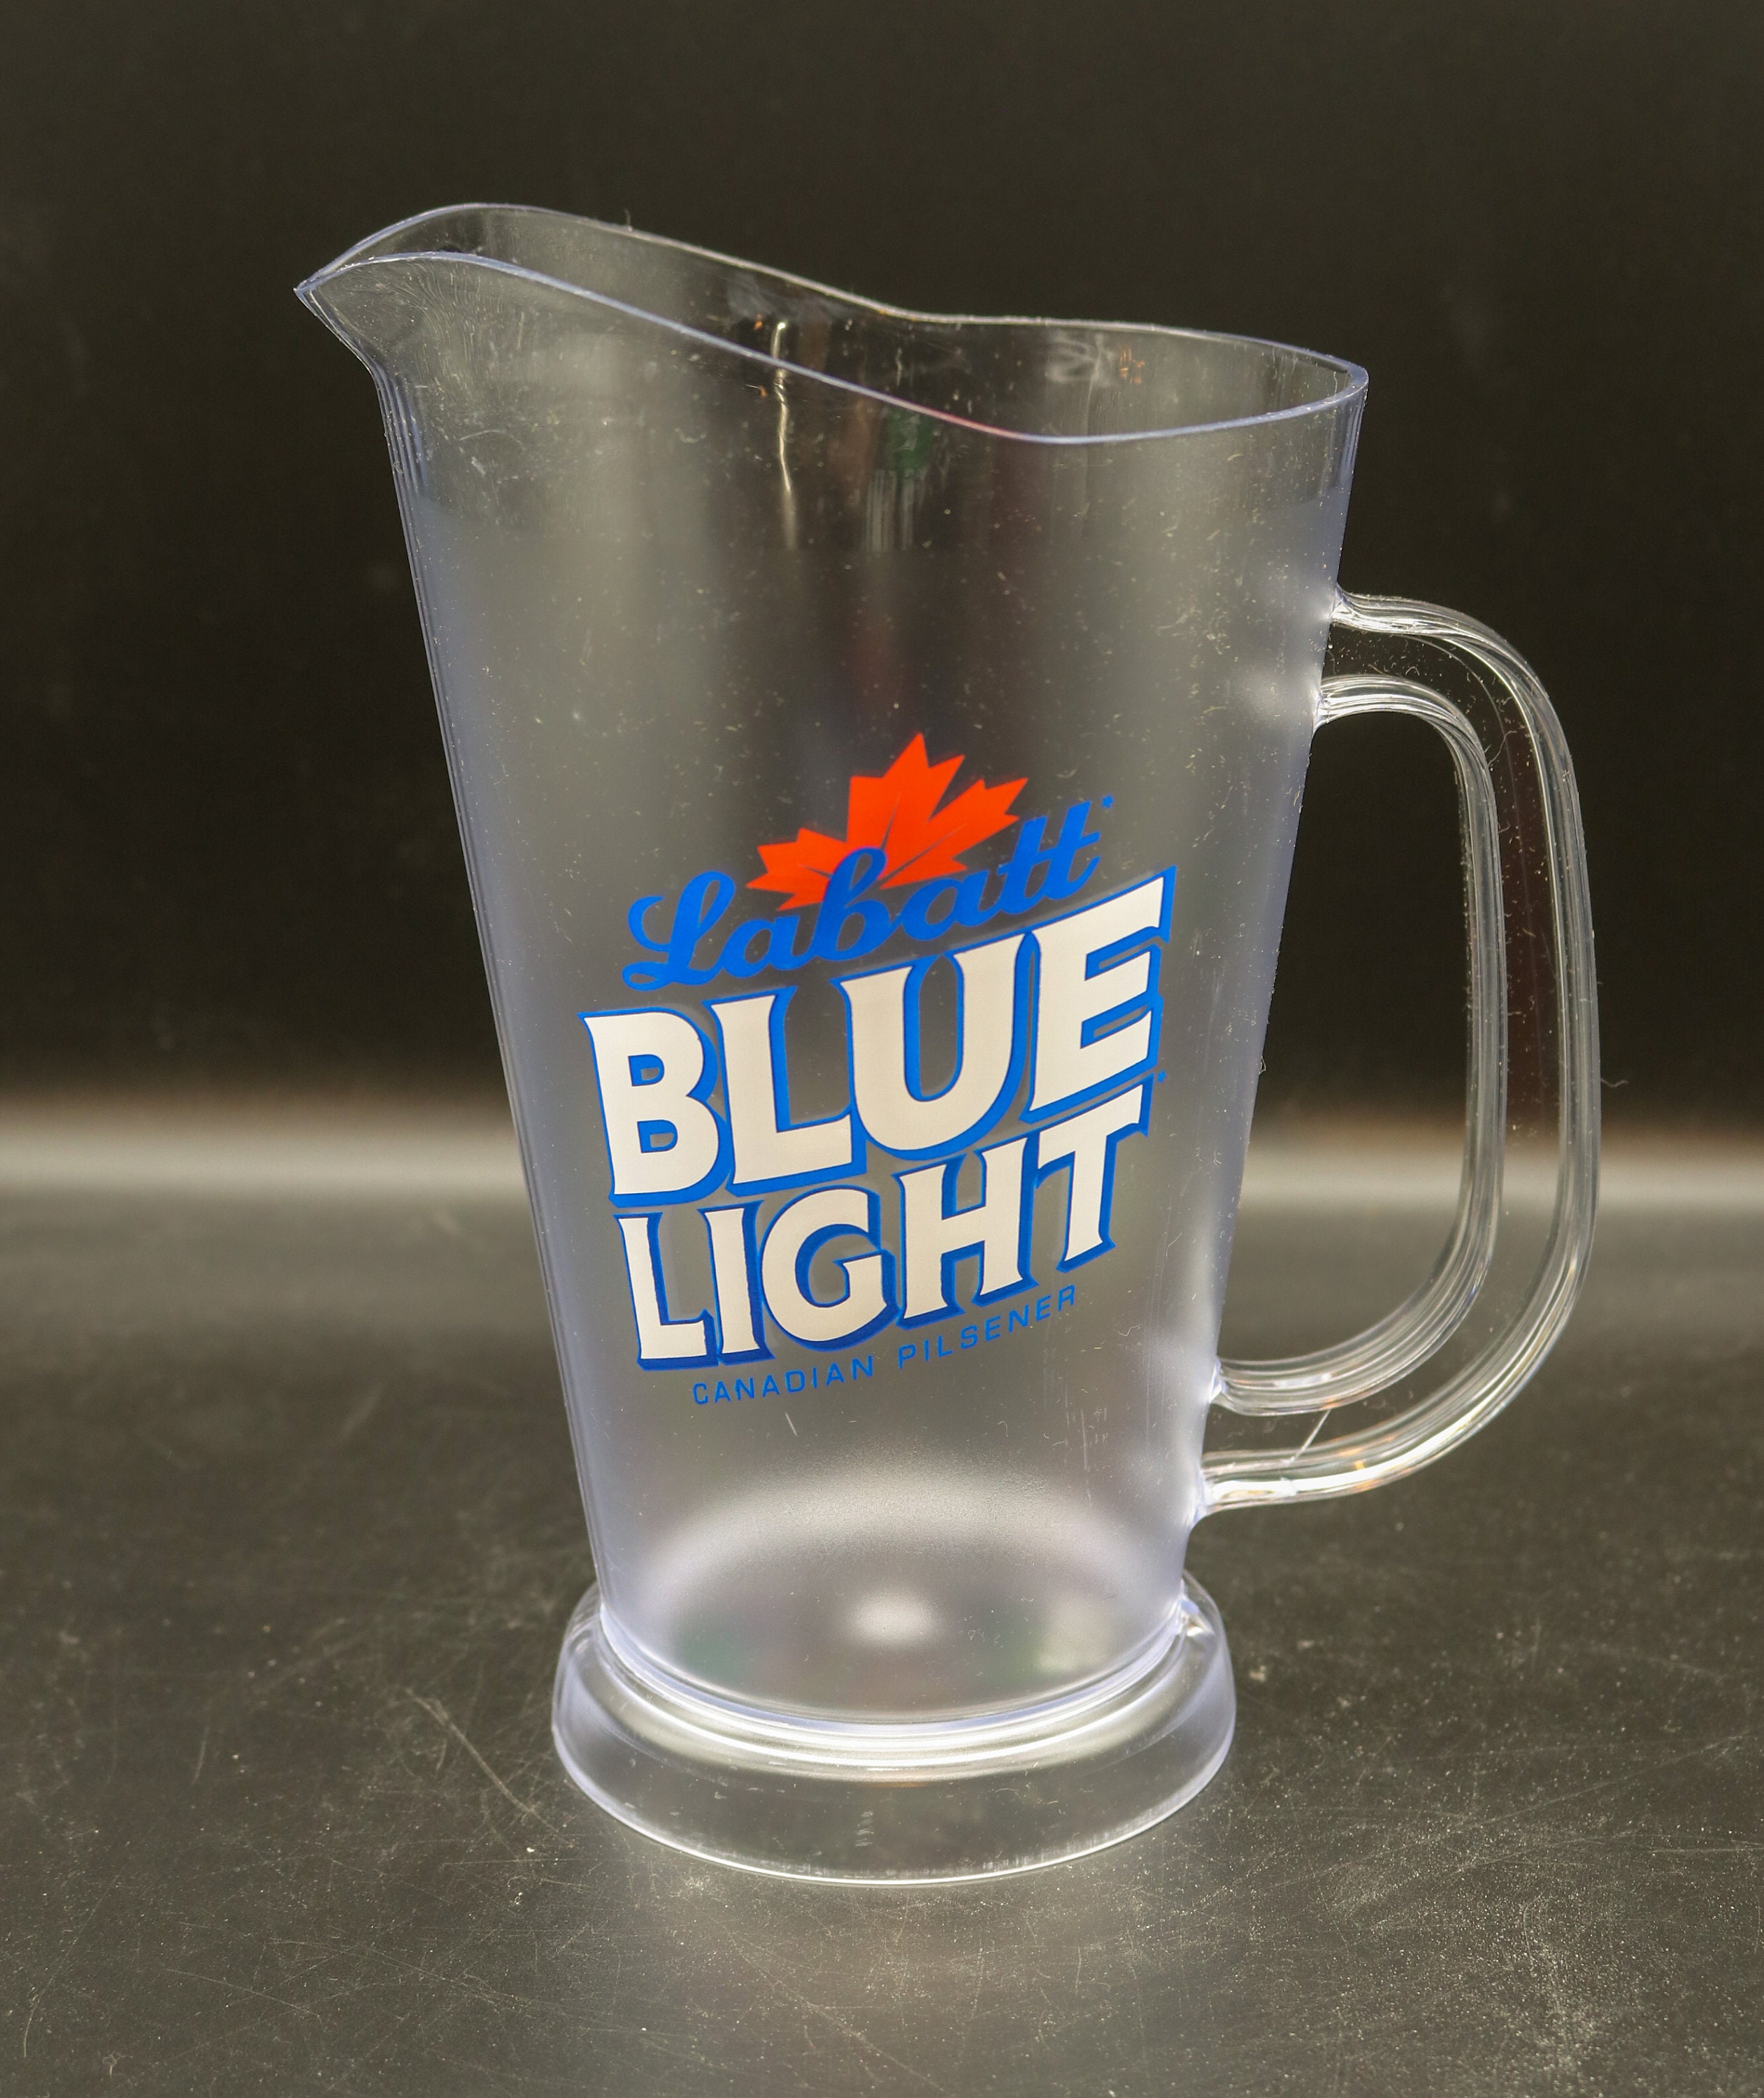 Plastic Blue 1/2 Gallon Pitcher With 6 Glasses Poolware